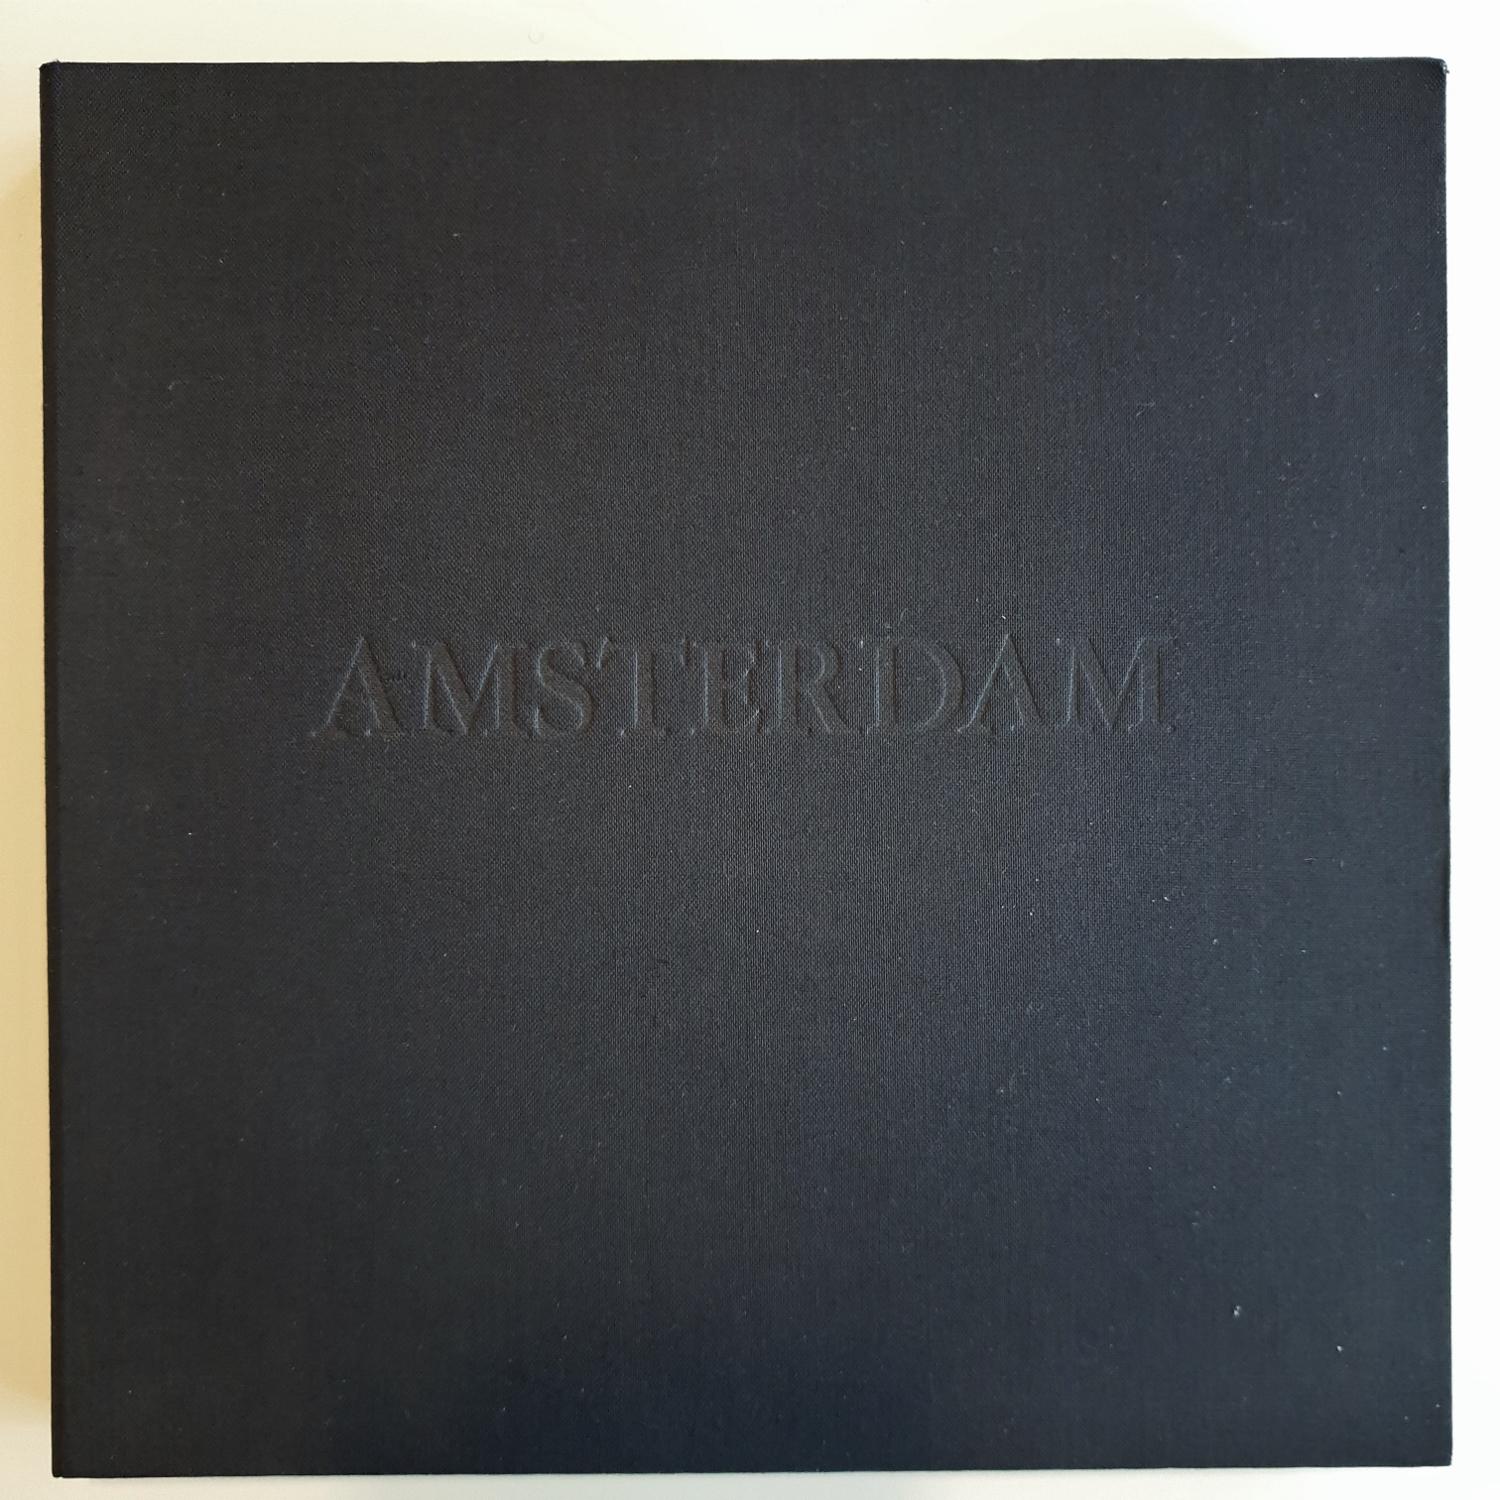 Amsterdam V is an intriguing early career aquatint dry-needle etch print by renowned French-Dutch artist Olivier Julia. It depicts a detail of an old Amsterdam house facade is both abstract and realistic at the same time. The paper used is 240 grams